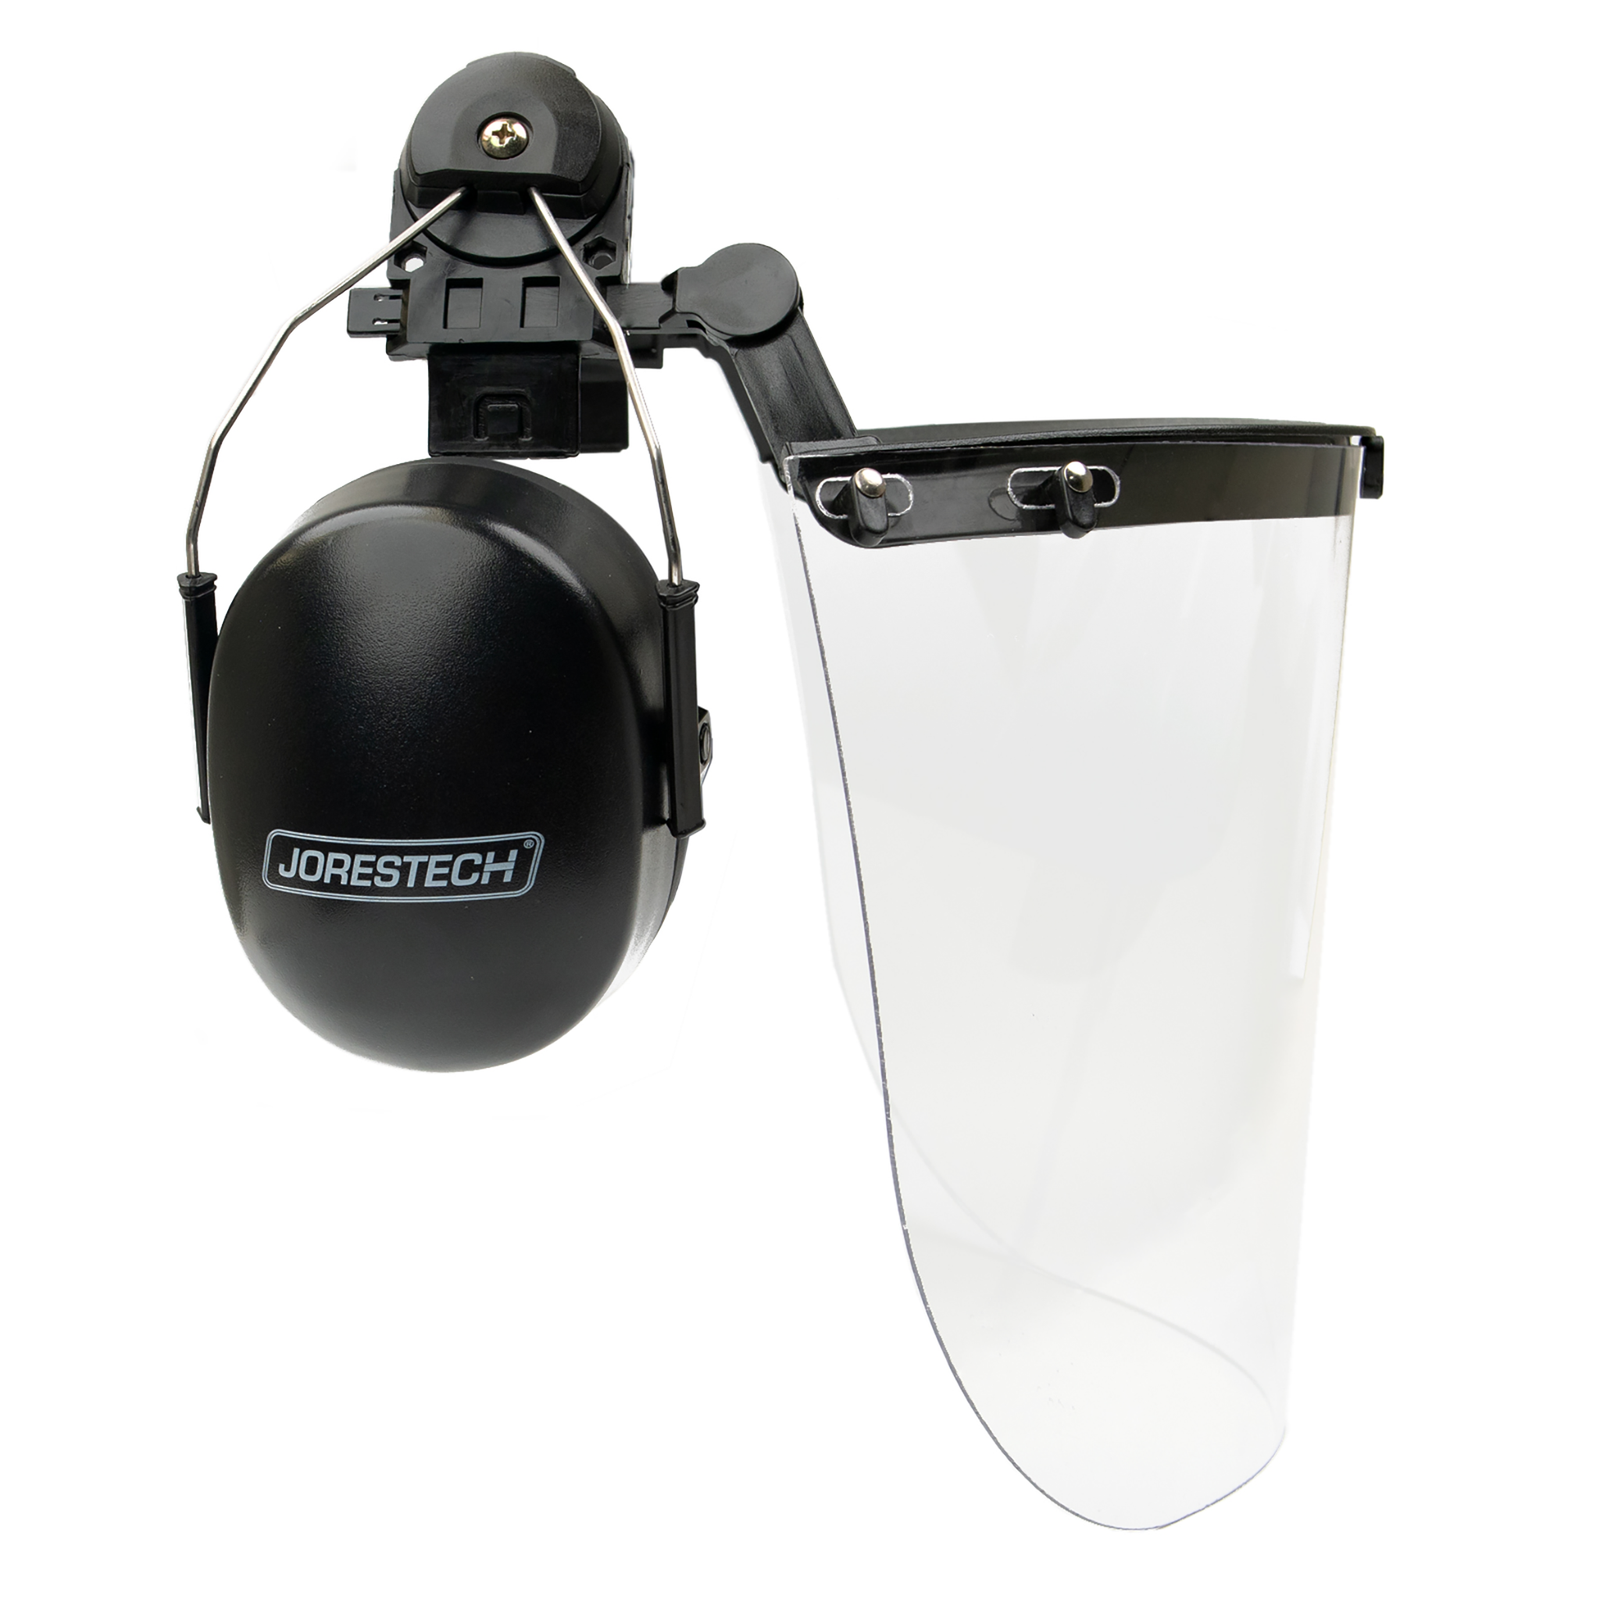 Image of the plastic shield and earmuffs that are compatible with the jorestech hard hat